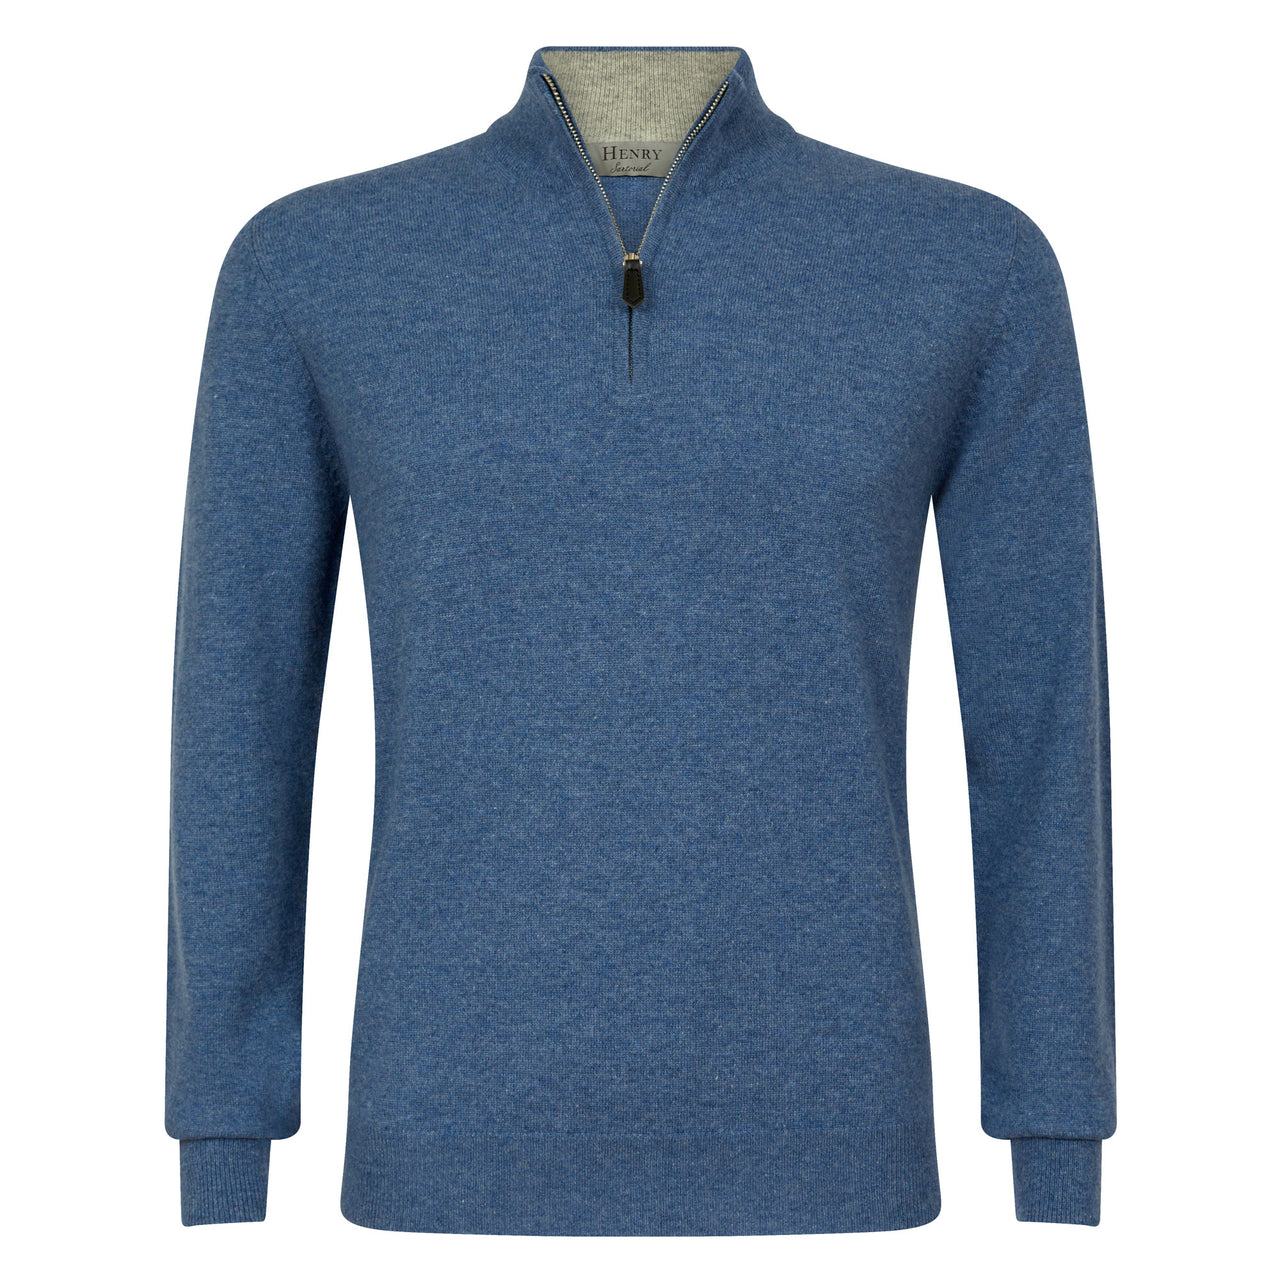 HENRY SARTORIAL Cashmere 1/2 Zip Knit MID BLUE